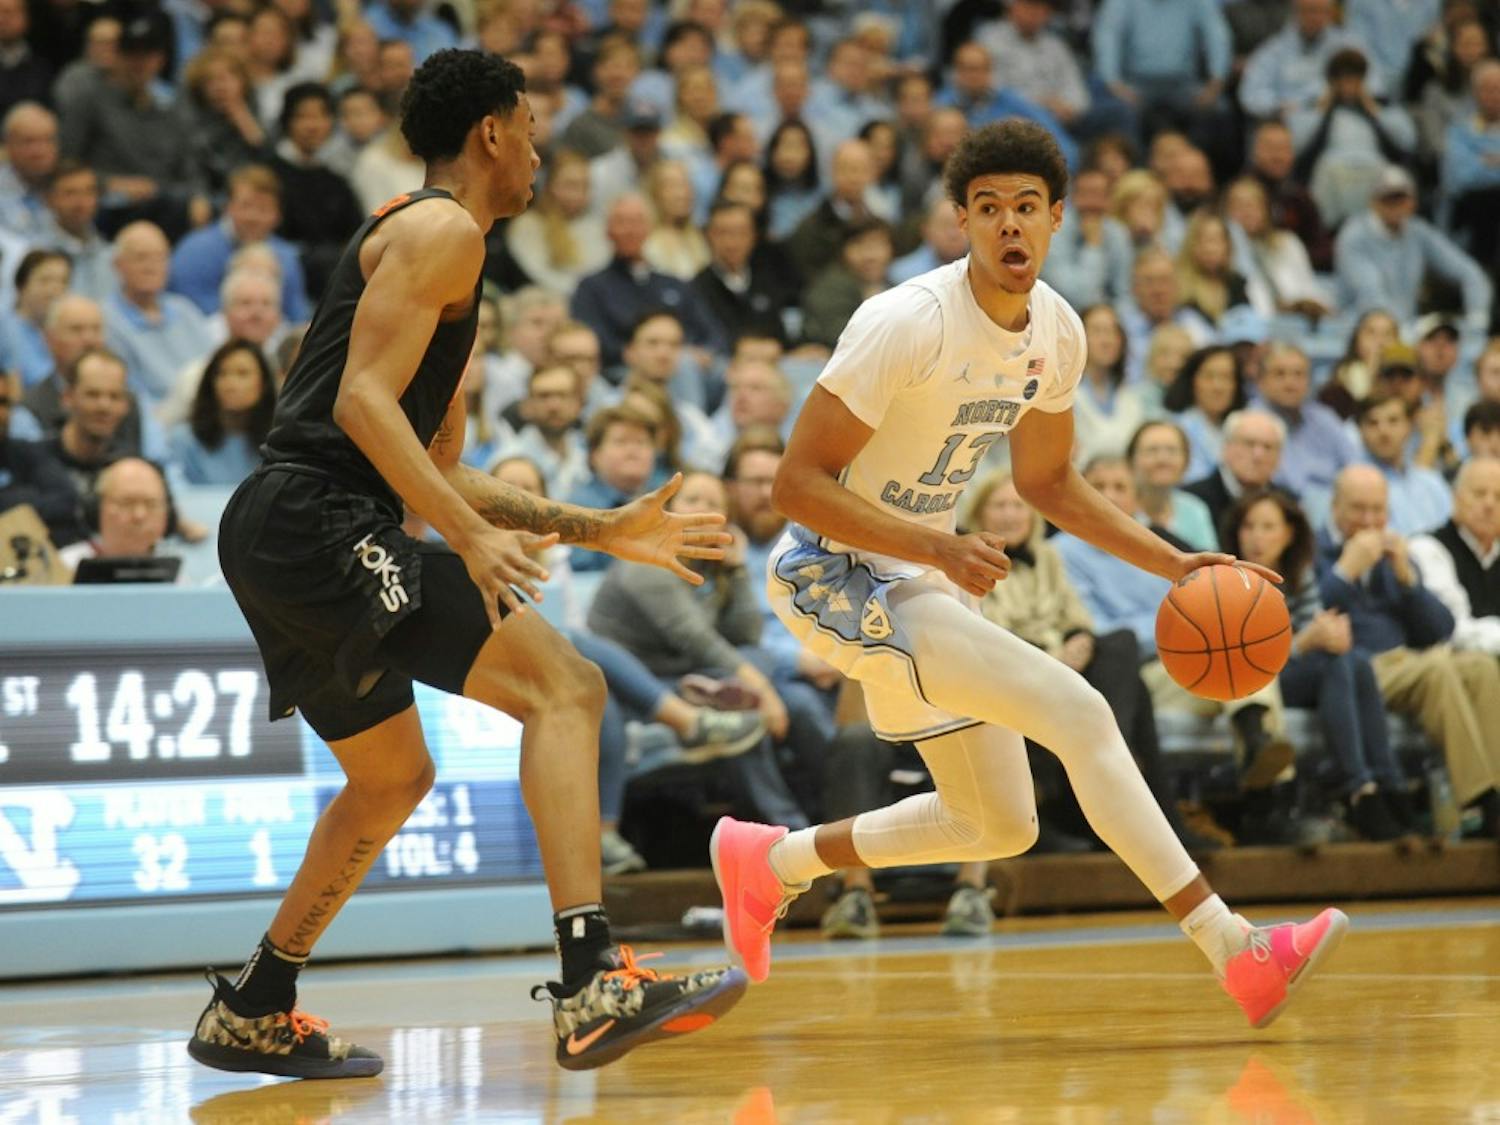 UNC graduate guard Cameron Johnson (13) evades Virginia Tech sophomore guard Nickeil Alexander-Walker (4) to make a pass at the Smith Center on Monday, Jan. 21, 2019. The Tar Heels won the game 103-82.